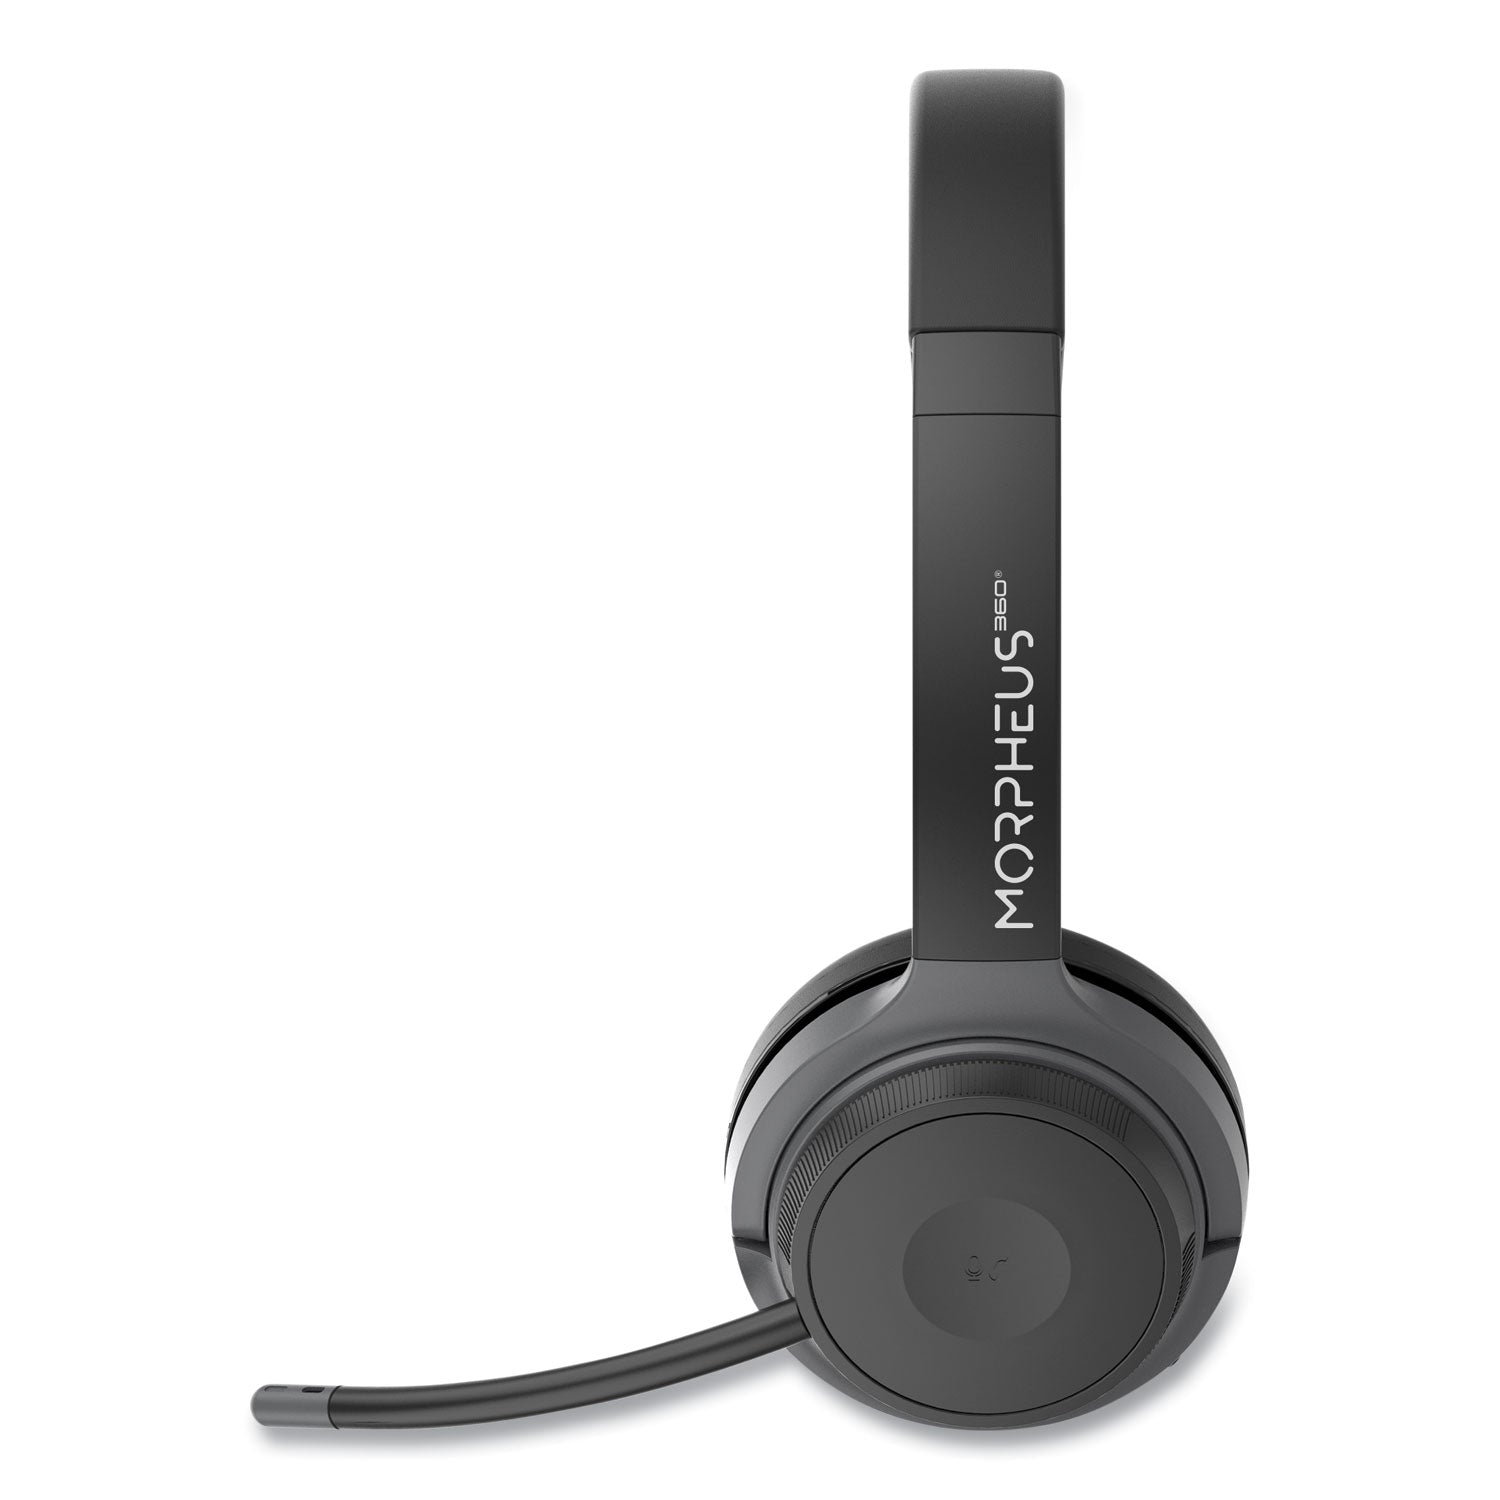 hs6500sbt-advantage-wireless-stereo-headset-with-detachable-boom-microphone_mhshs6500sbt - 4